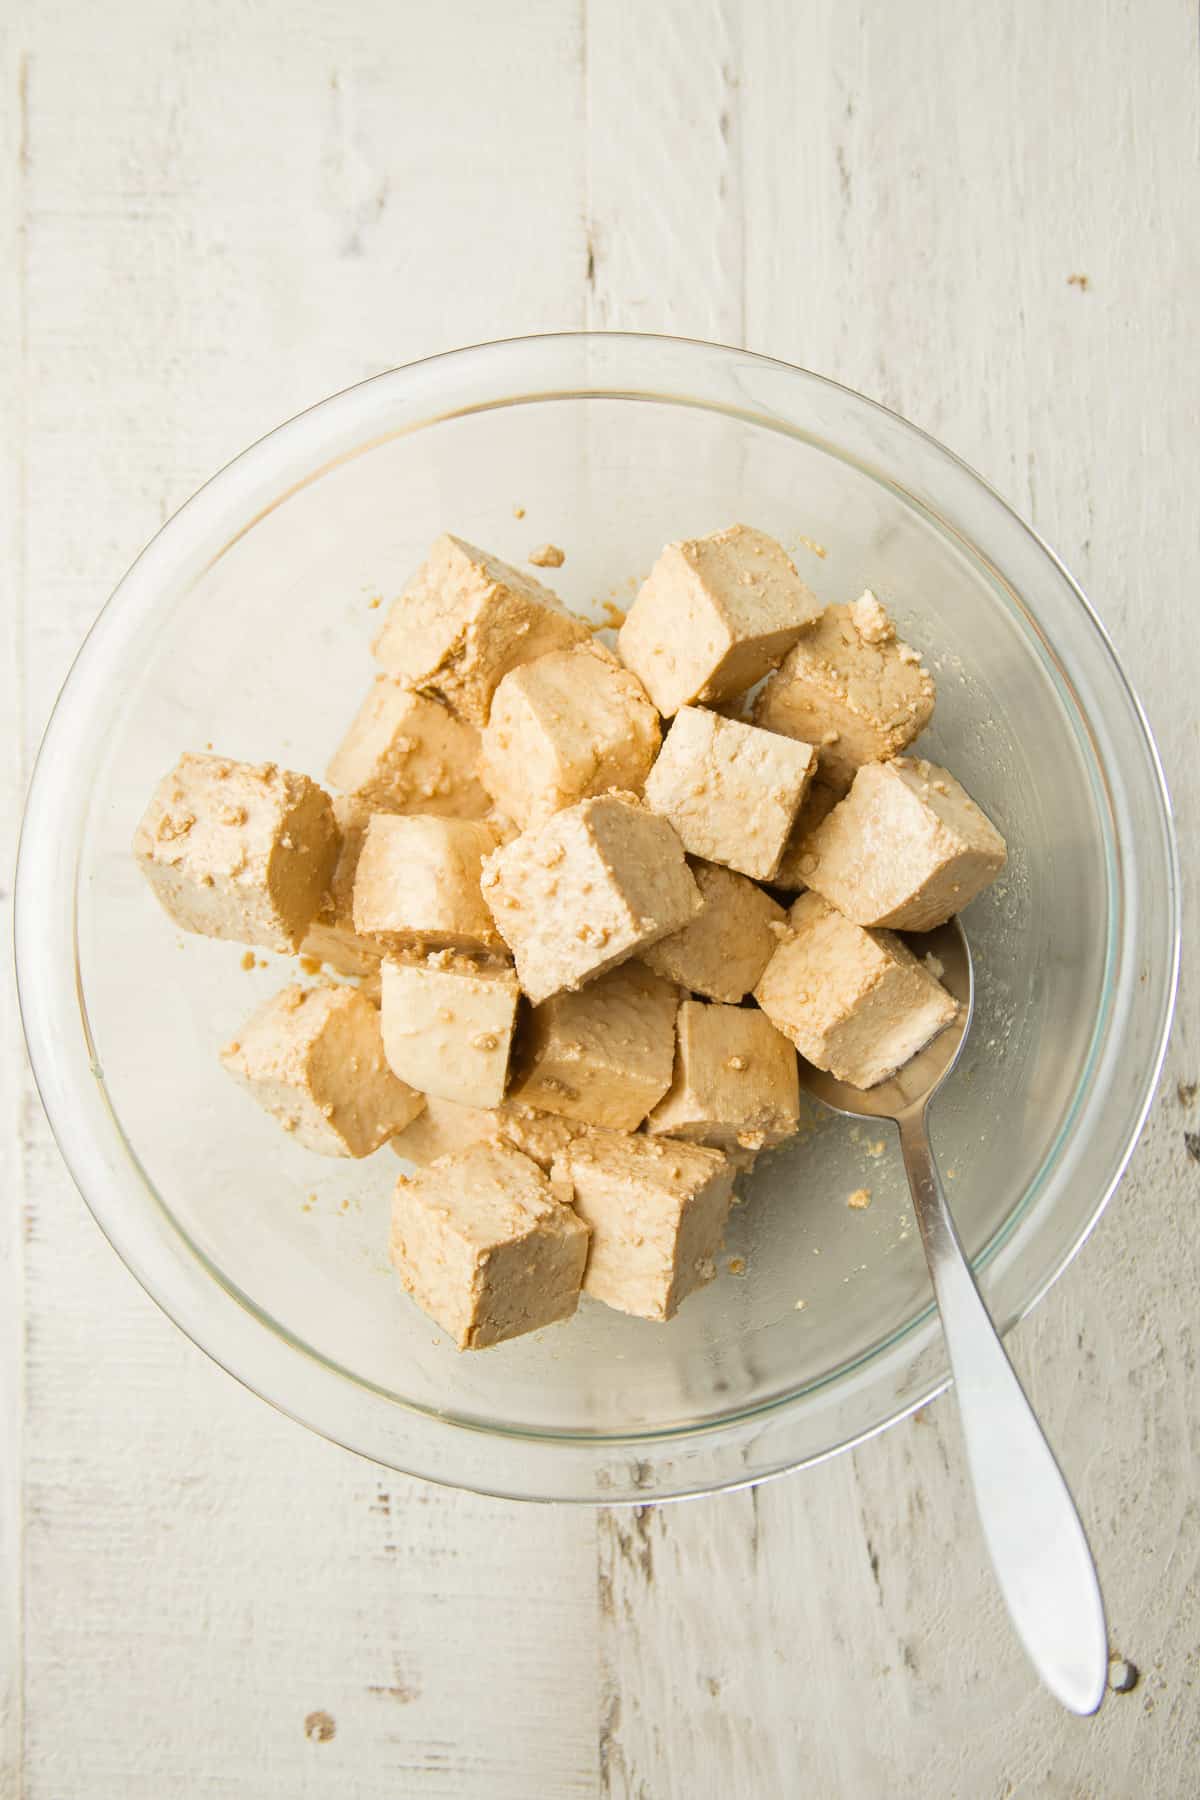 Tofu in a Bowl with Seasonings and a Spoon